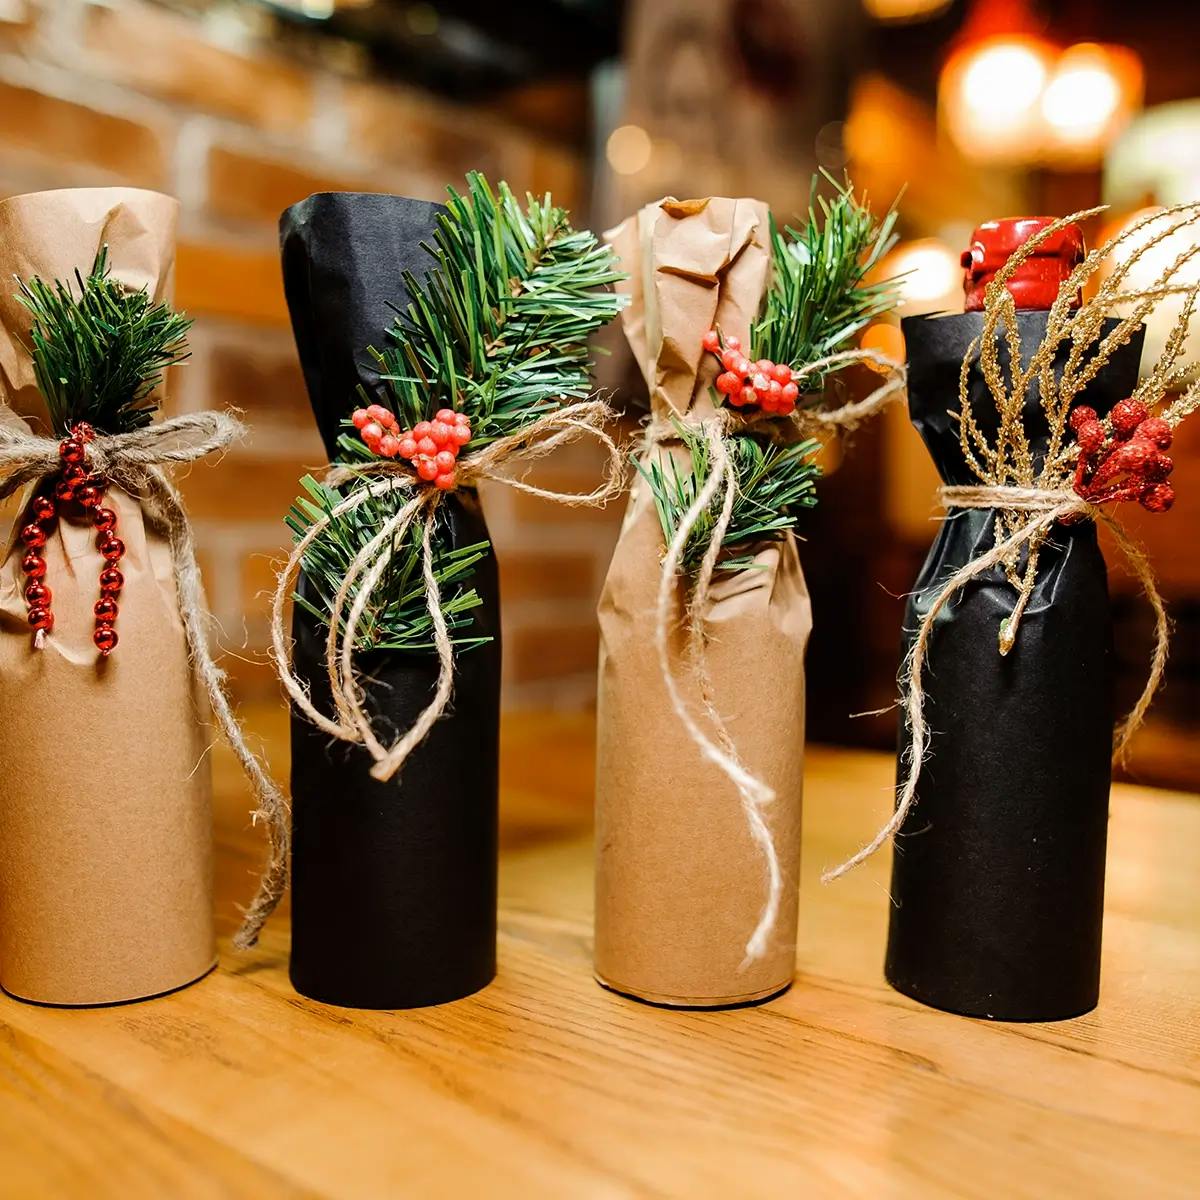 Four bottles of wine, wrapped in brown paper tied with ribbon and decorated with spruce and berries.